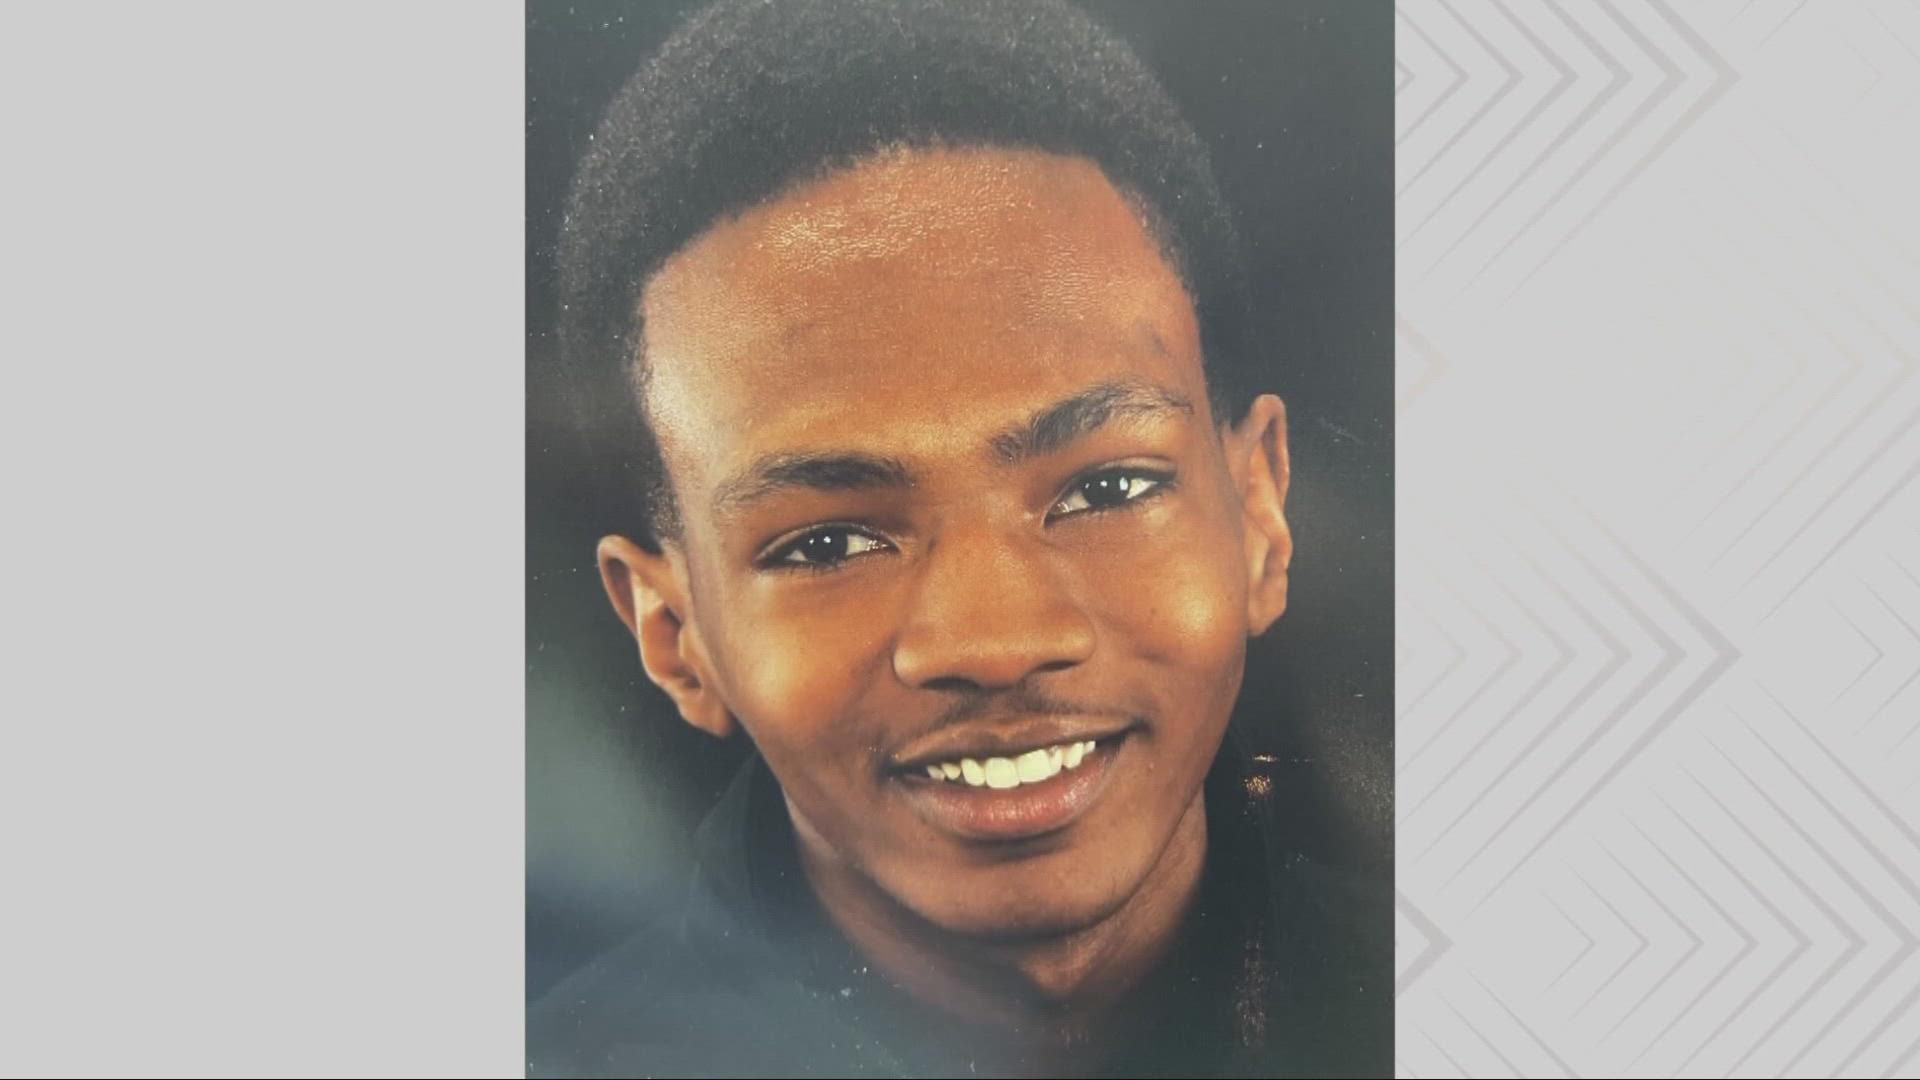 Akron has canceled their Rib, White and Blue festival for the July 4 weekend in response to the deadly shooting of Jayland Walker who died after a police chase.